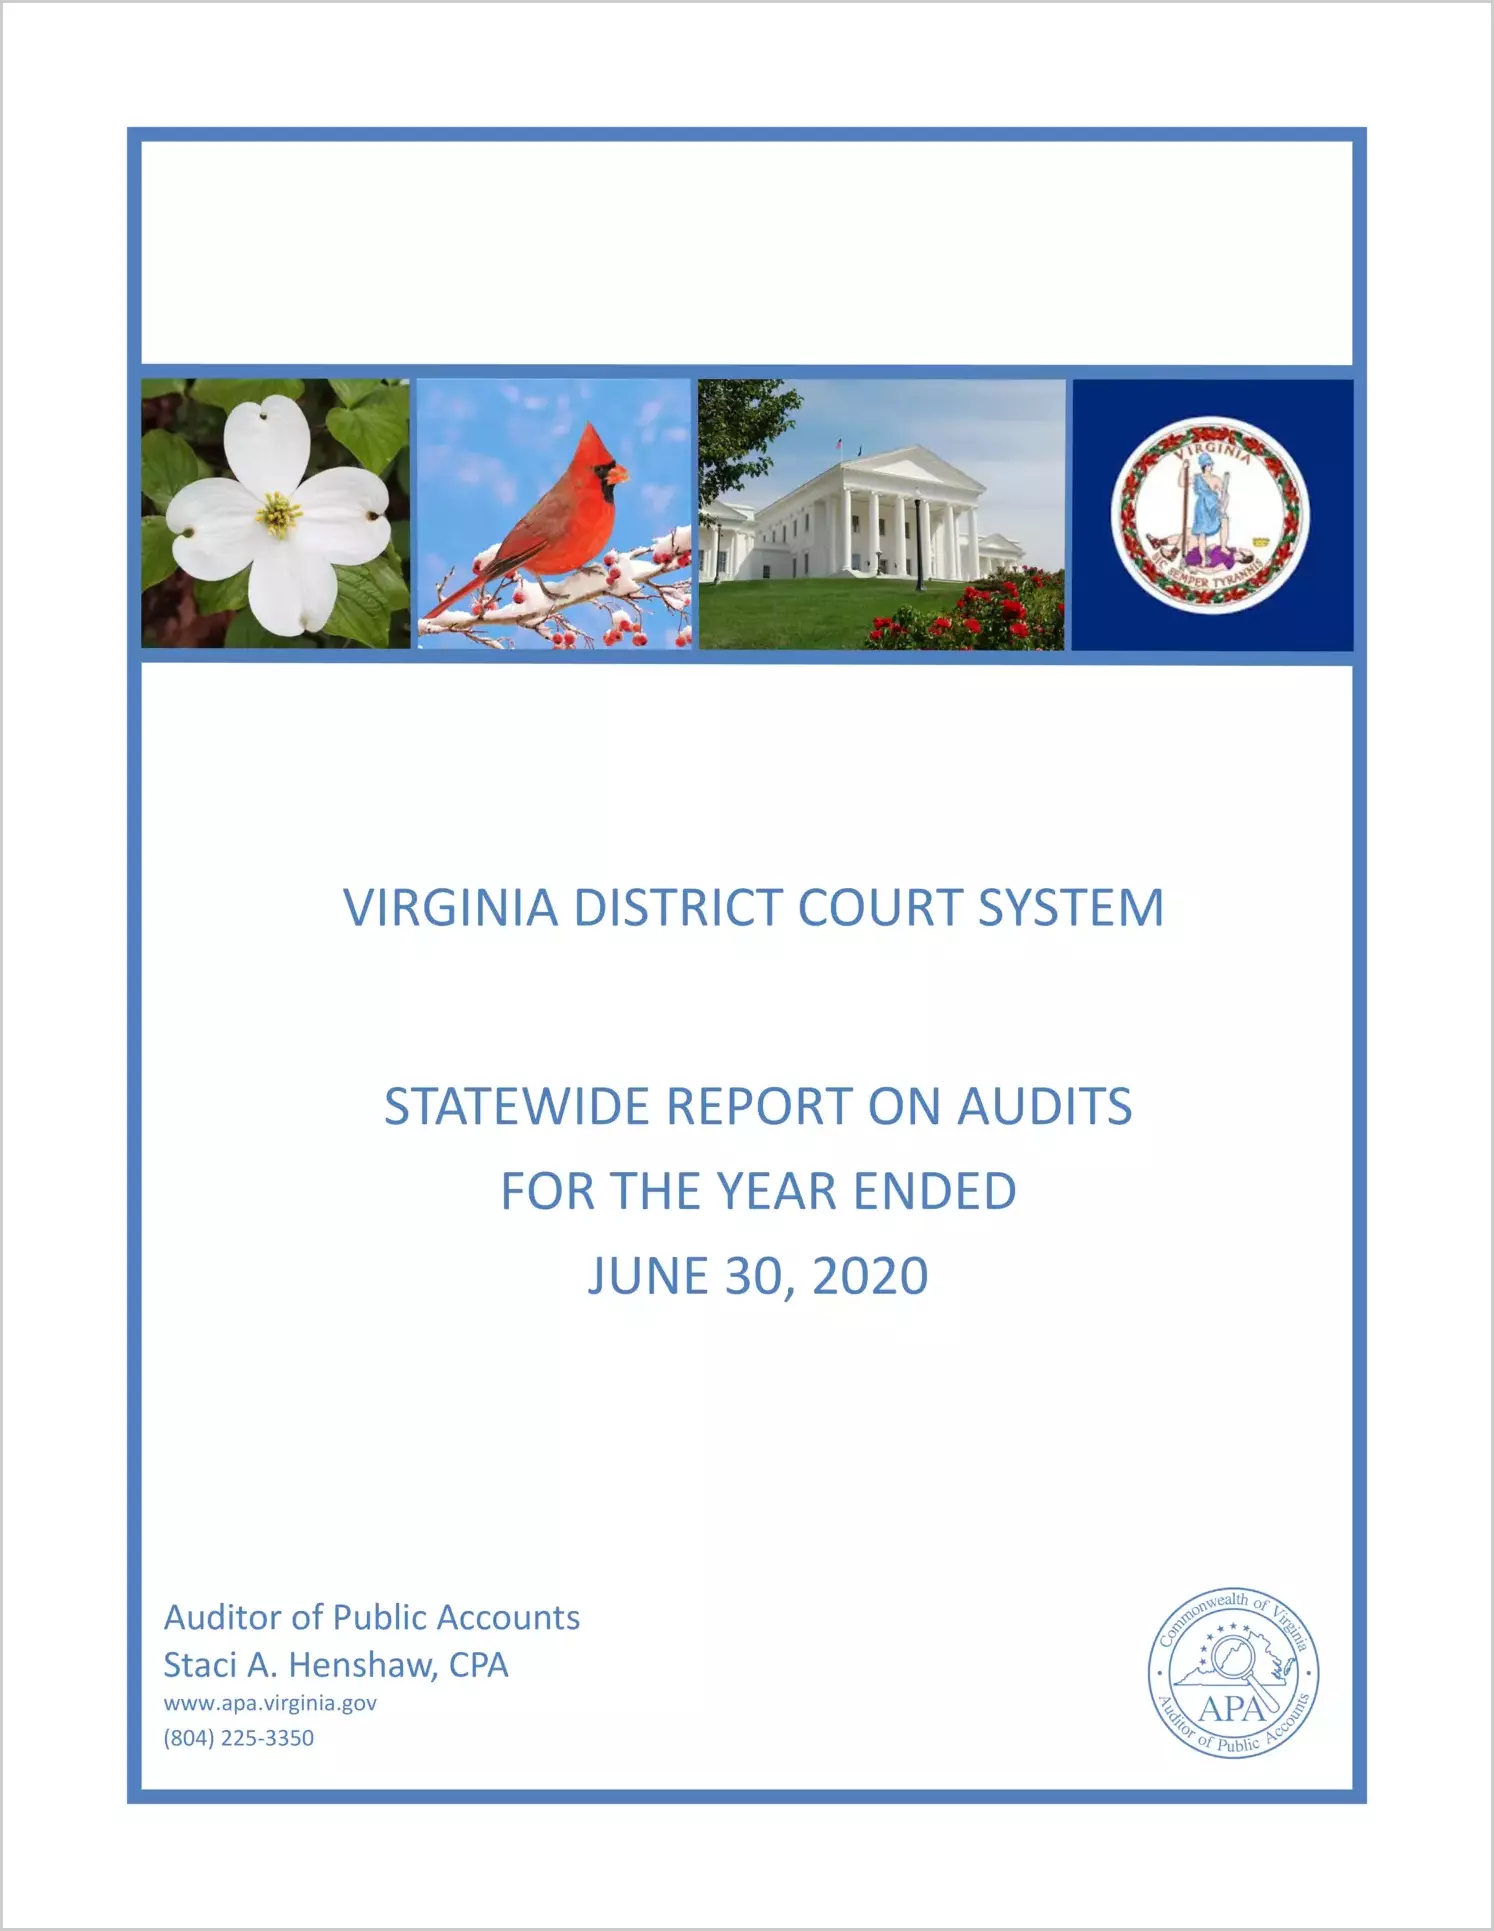 Virginia District Court System Statewide Report on Audit for the year ended June 30, 2020